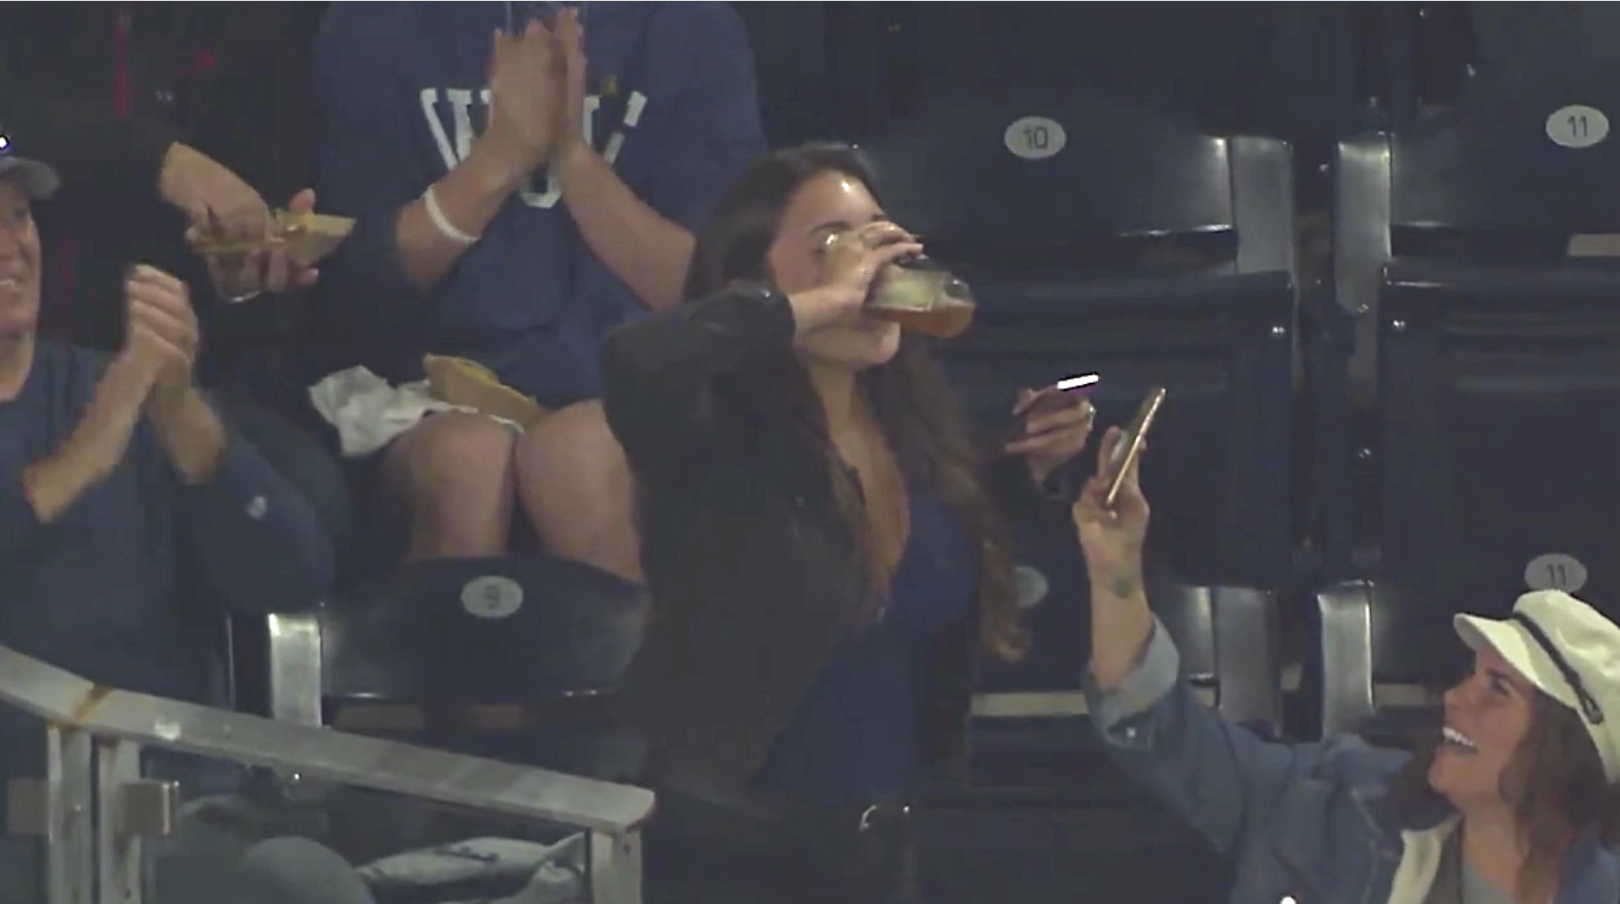 Woman Catches Foul Ball In Beer At Padres Game Proceeds To Chug The Beer With The Ball In It